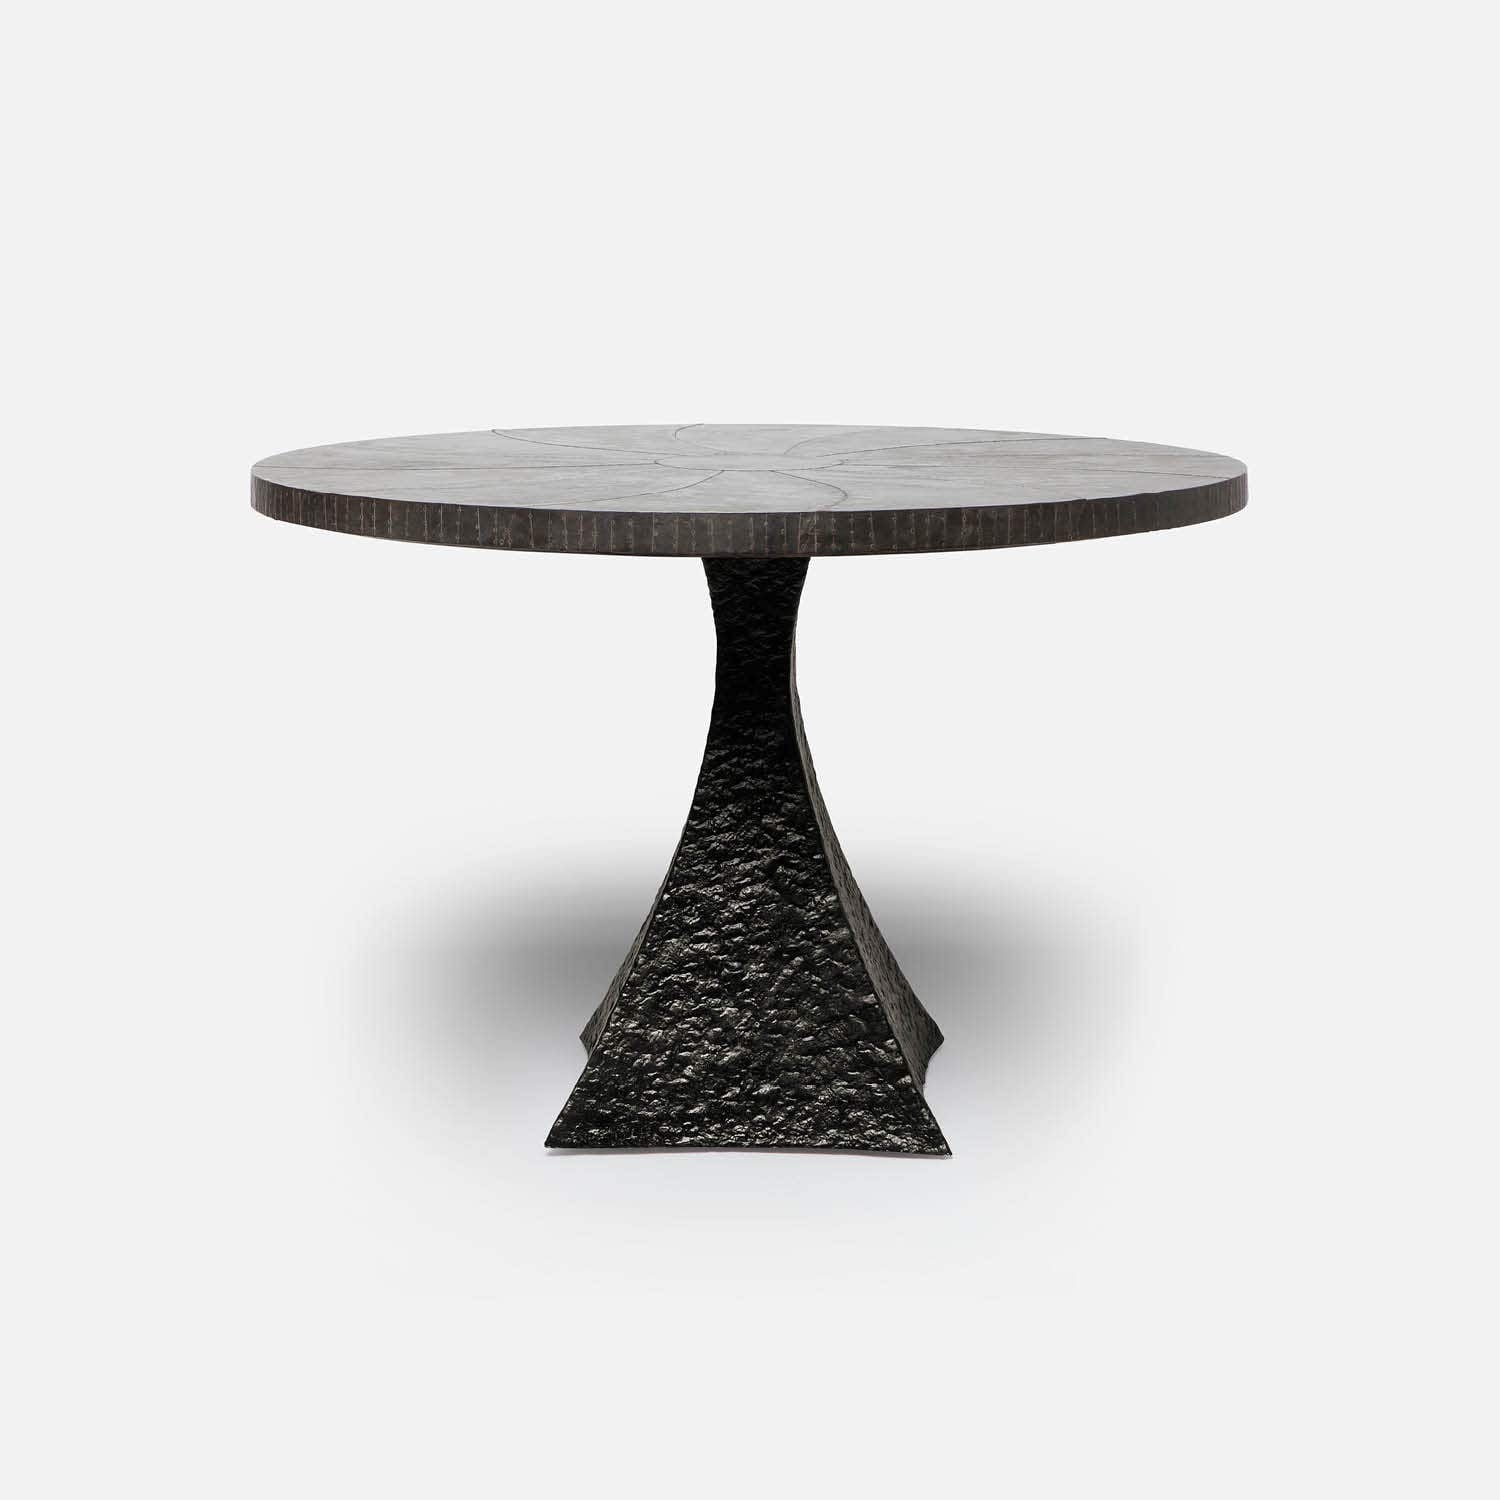 Made Goods Noor 48" x 30" Bumpy Black Iron Dinning Table With Round Zinc Metal Table Top